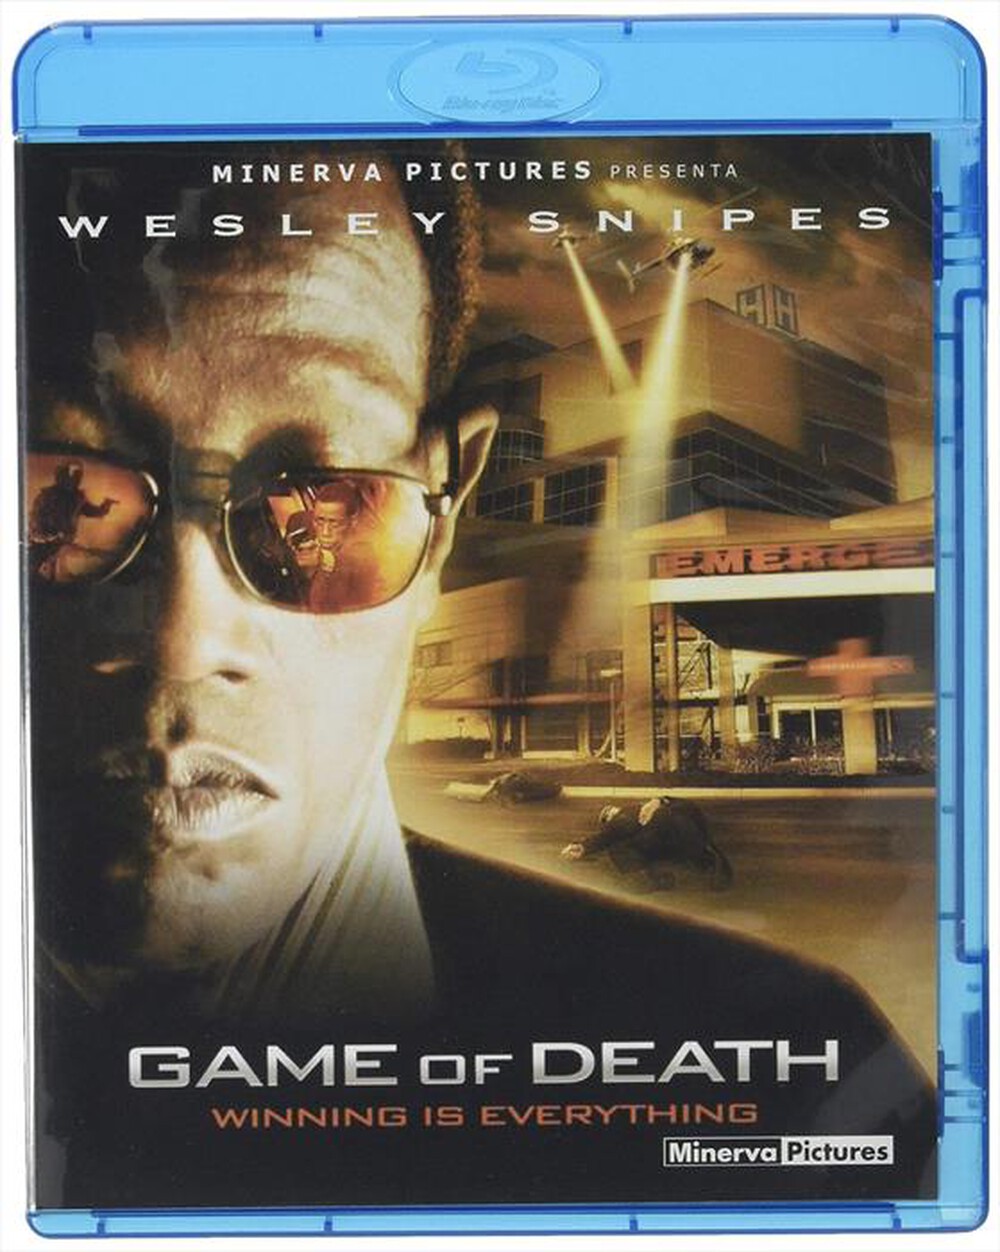 "Minerva Pictures - Game Of Death"